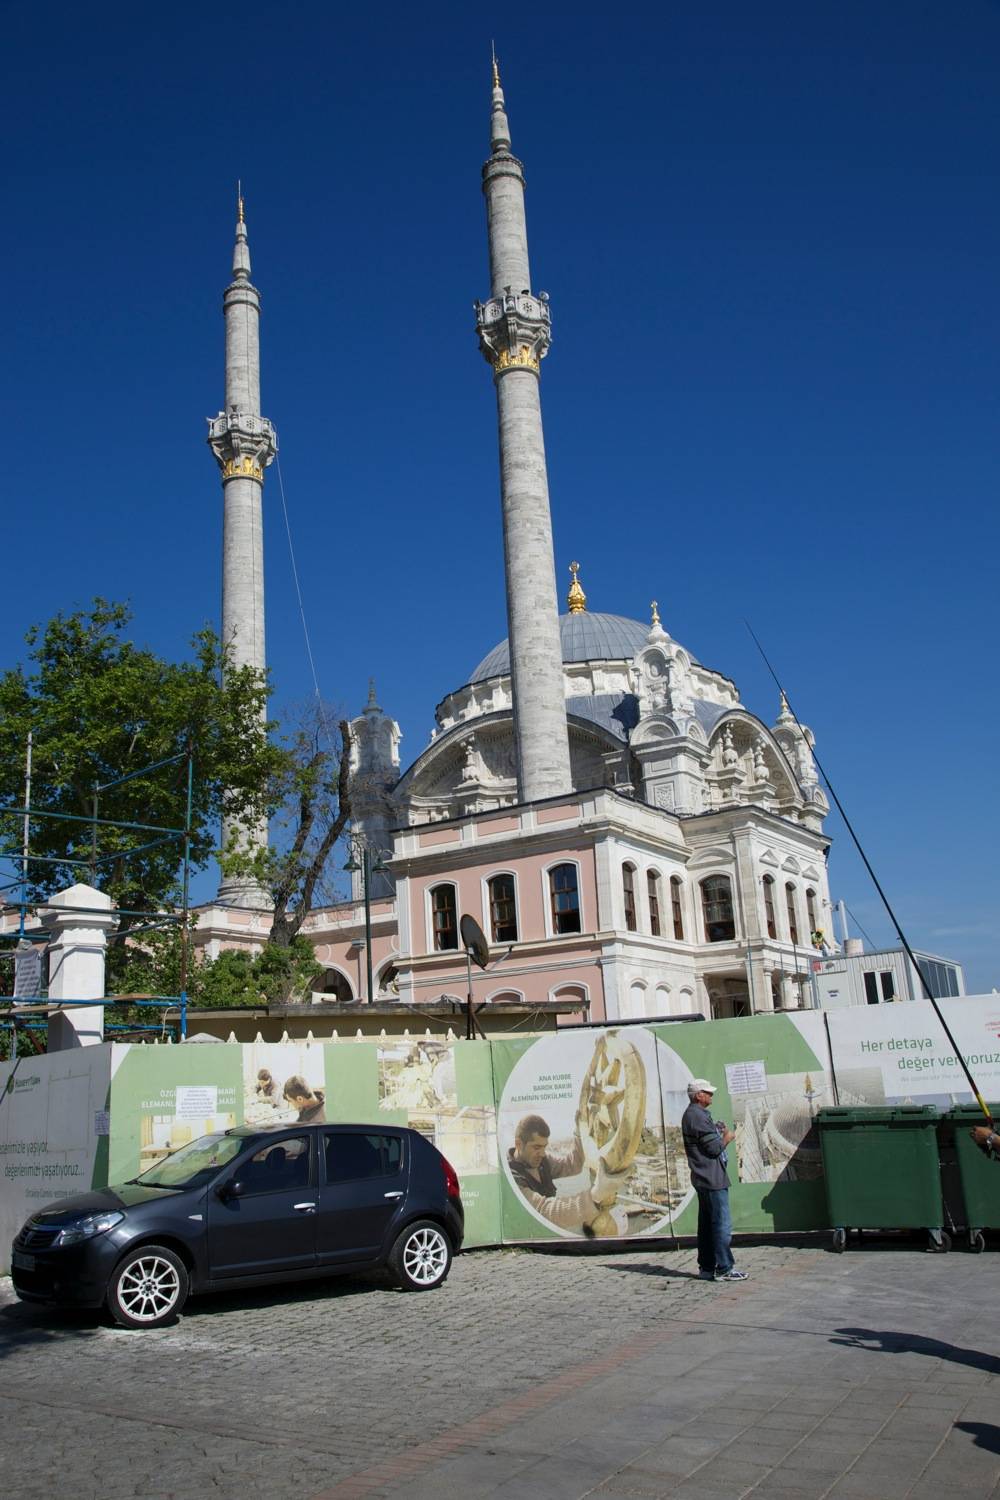 Exterior view showing some of the restoration work in progress